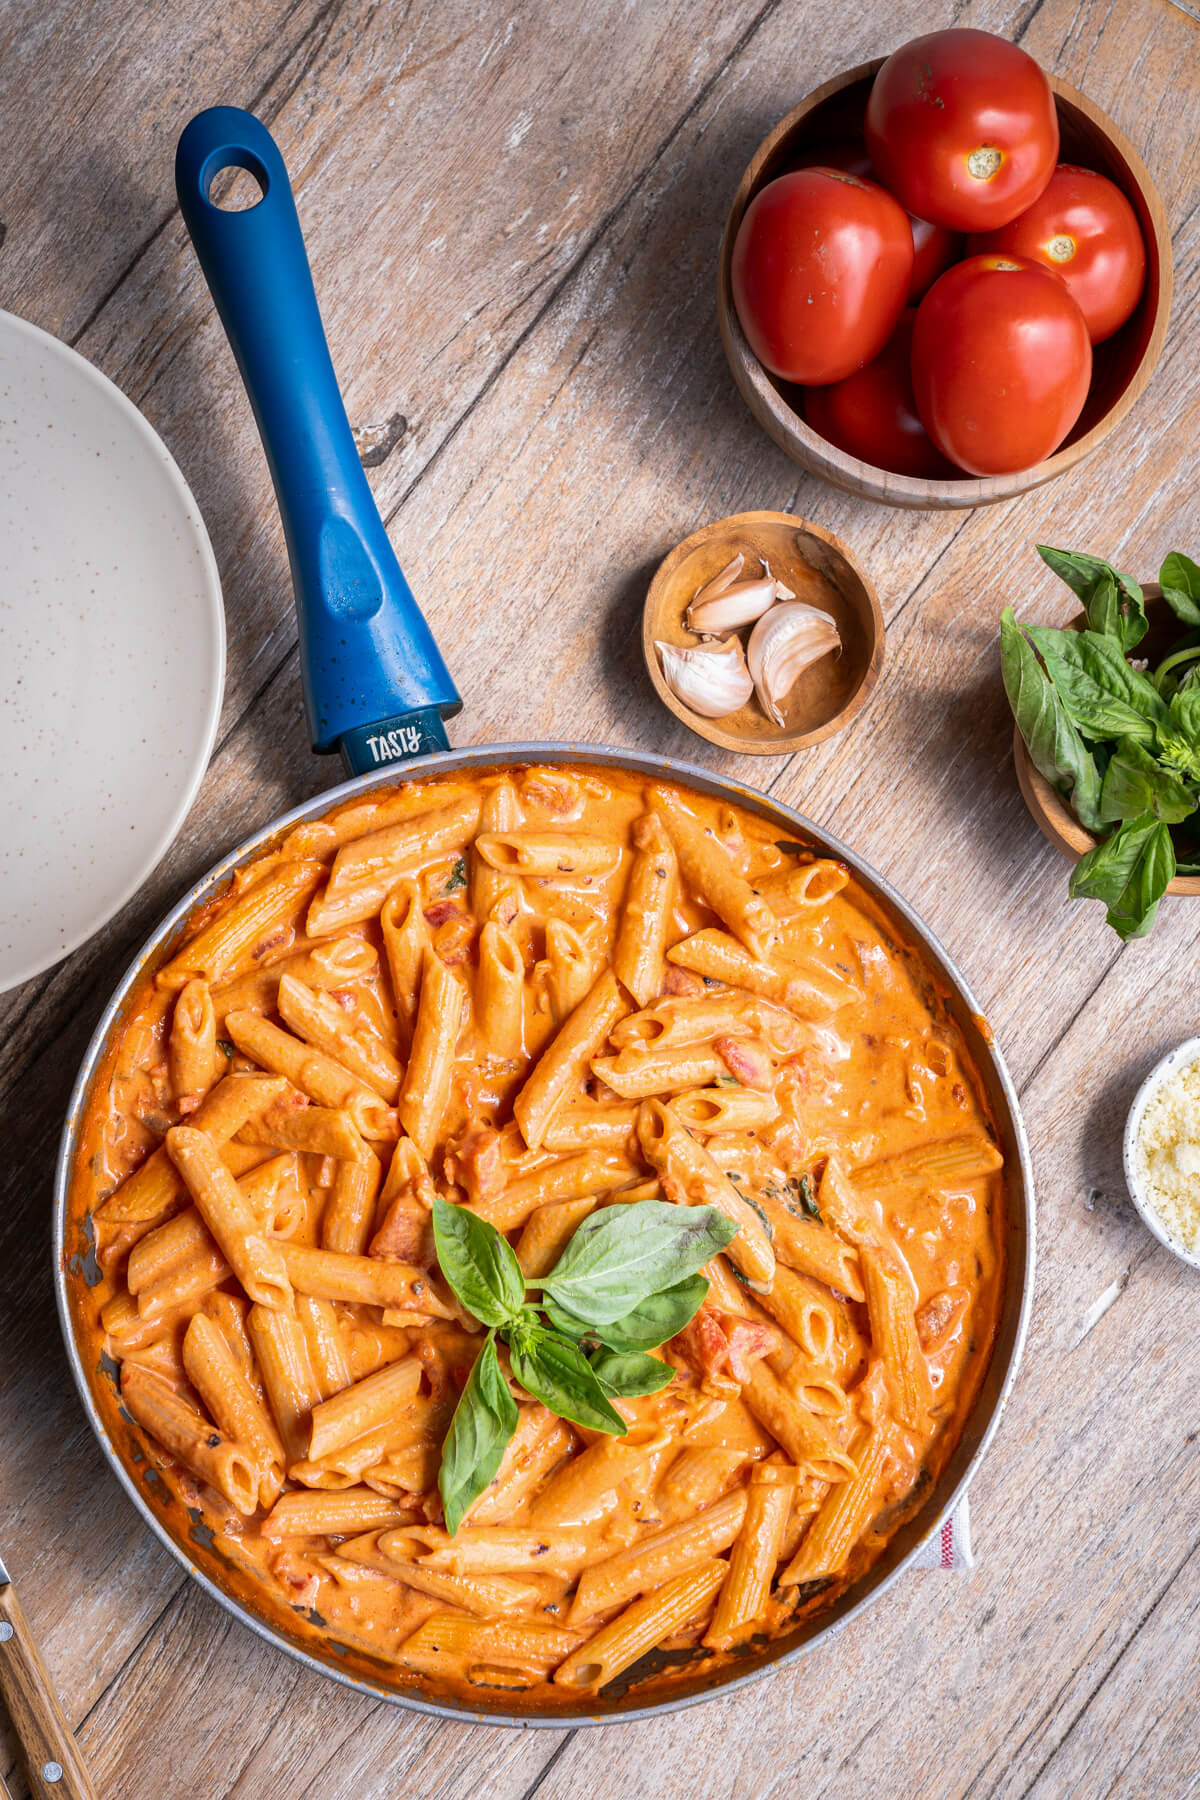 A skillet filled with penne pasta in Rosé sauce garnished with fresh basil leaves.